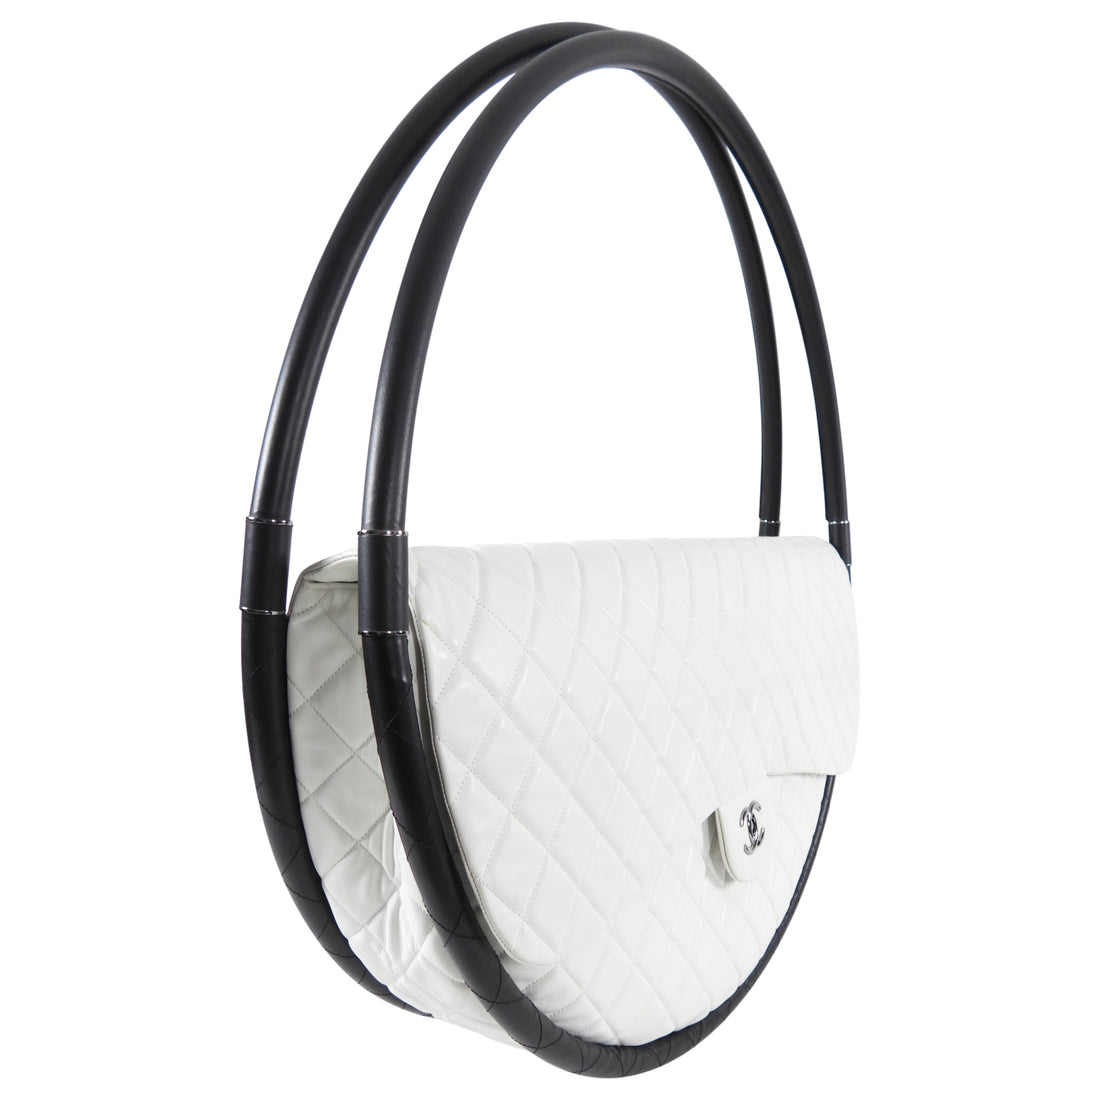 Chanel Rare Runway Hula Hoop Bag 2013 90cm - the Largest Ever